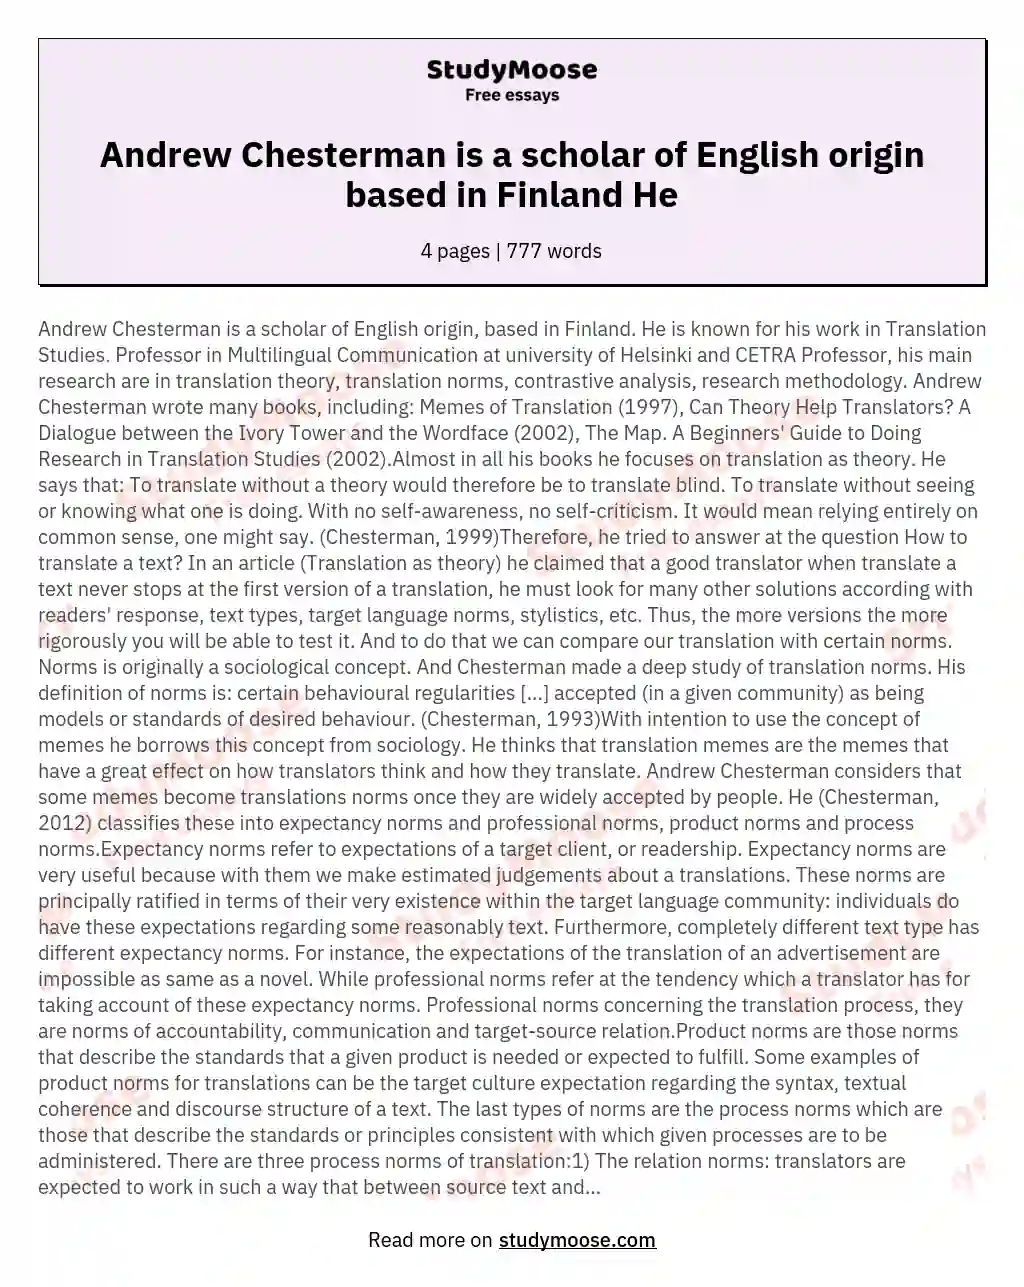 Andrew Chesterman is a scholar of English origin based in Finland He essay